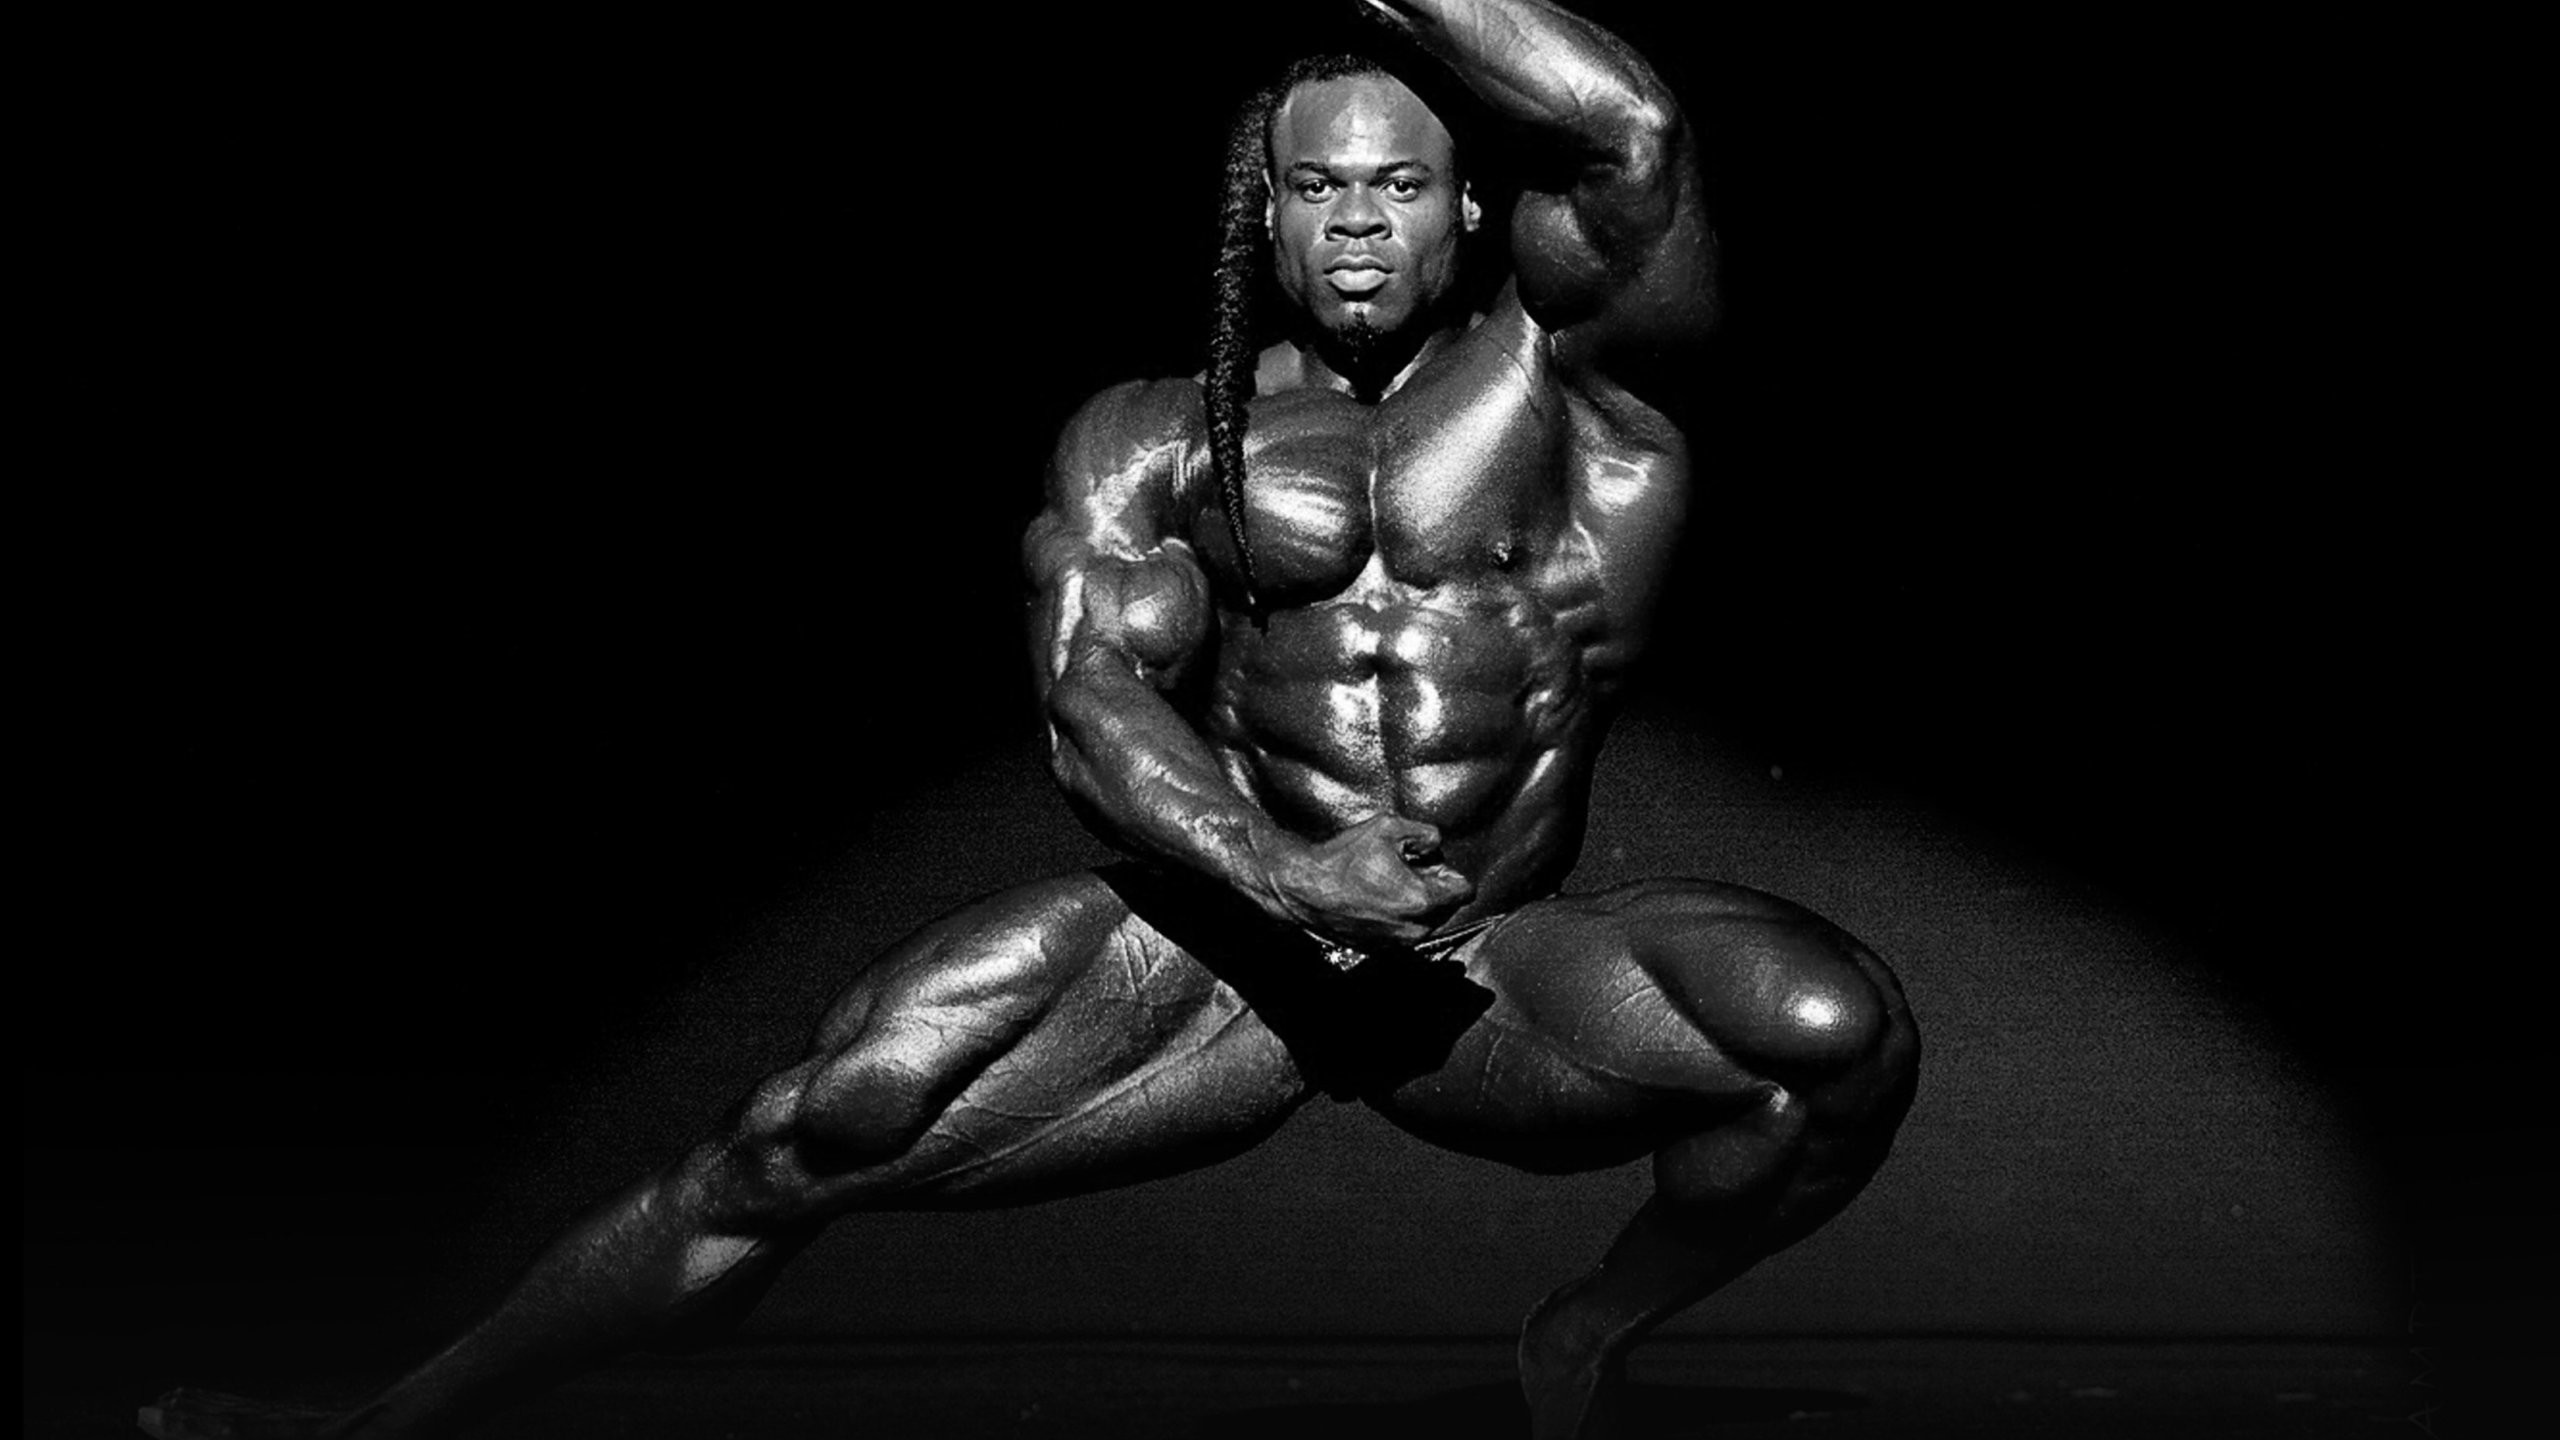 2560x1440 Gallery of Arnold Bodybuilding Pictures Wallpapers Free Wallpapers |  Adorable Wallpapers | Pinterest